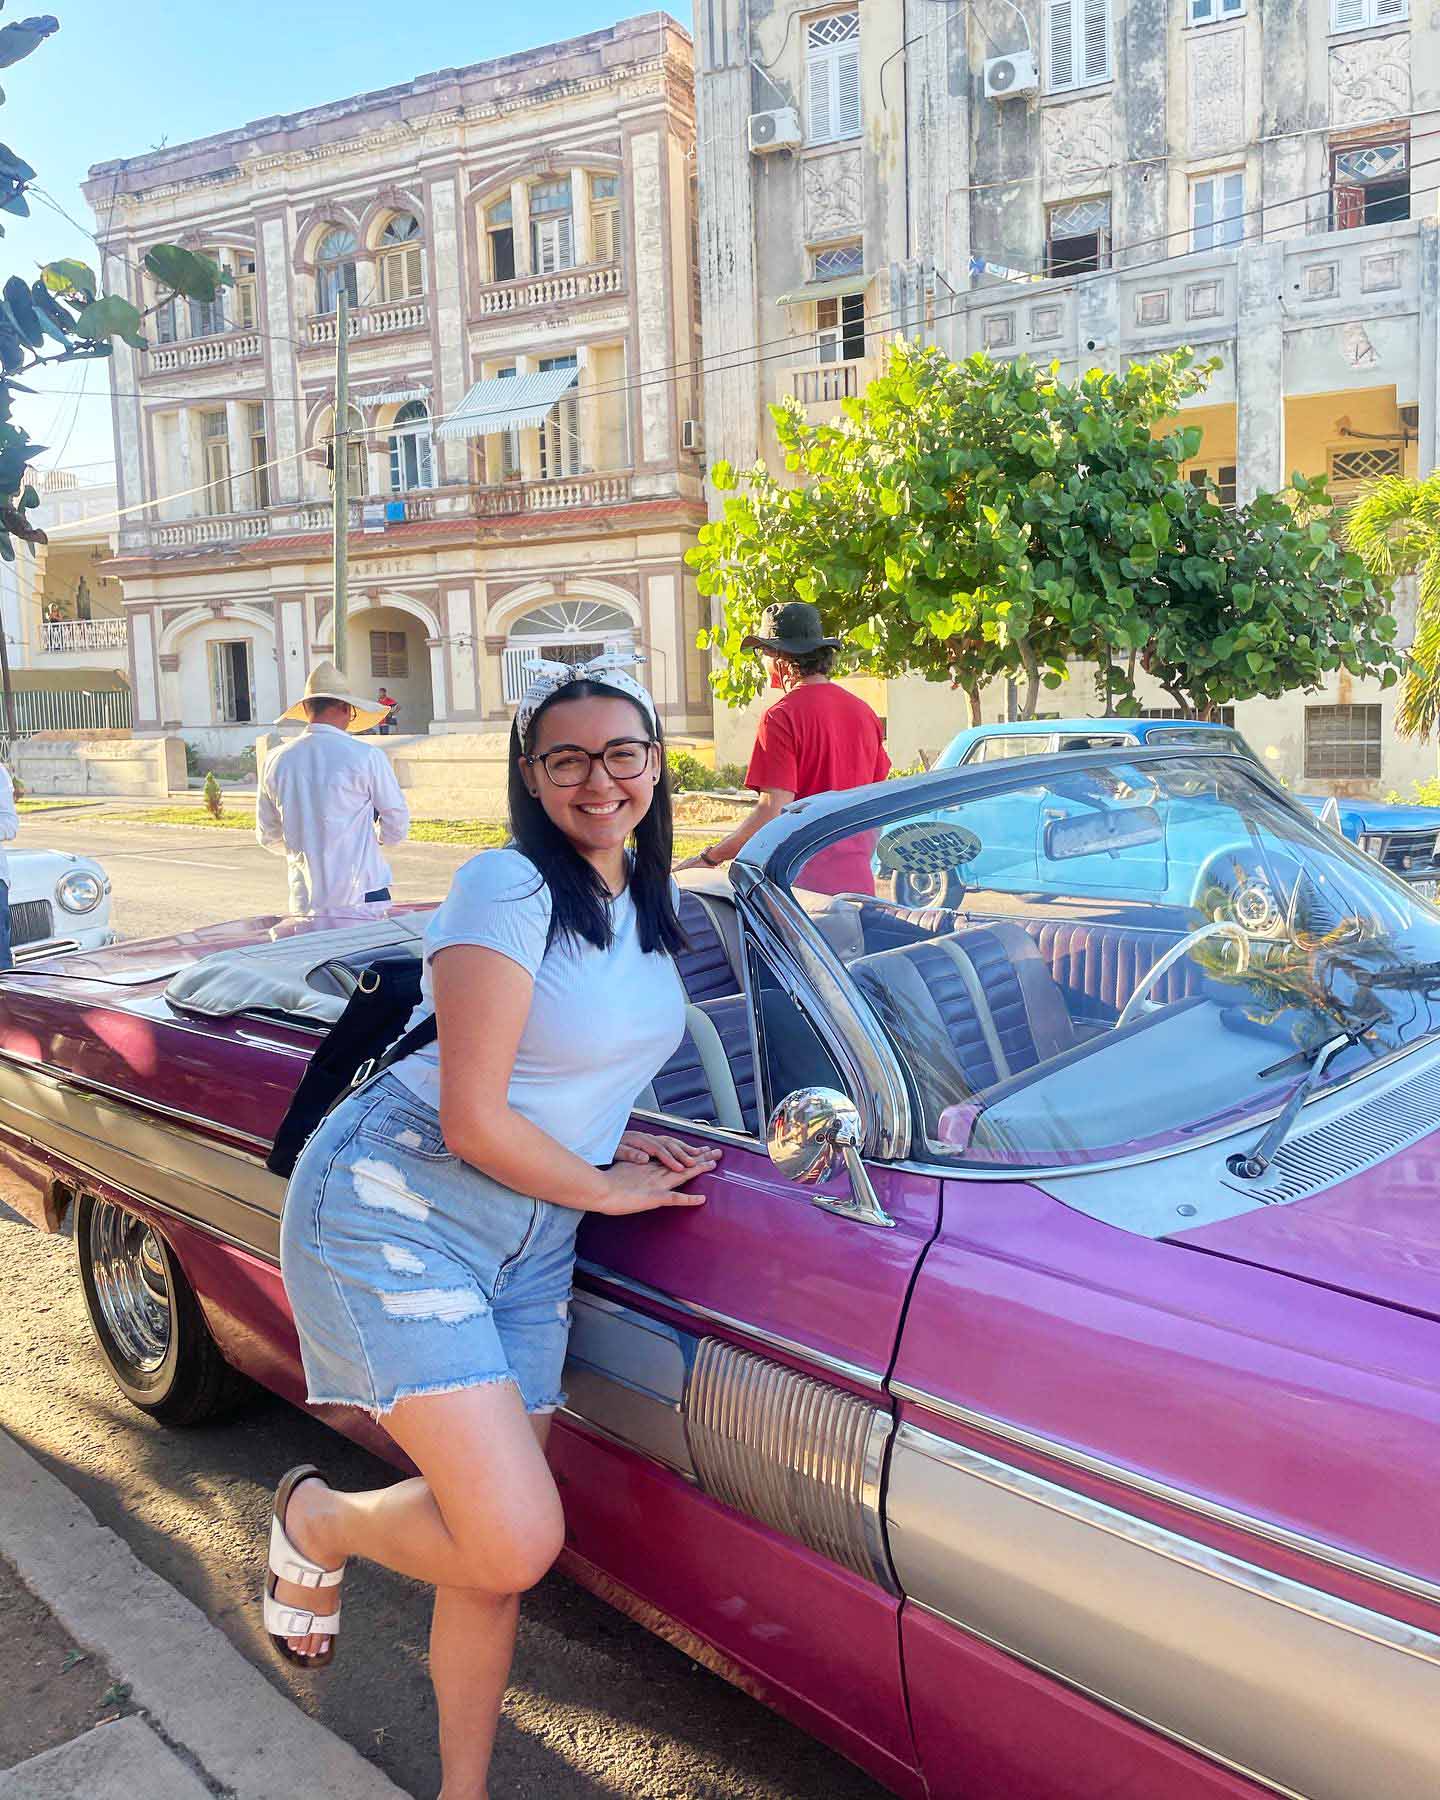 Student posing in front of a classic car in La Habana, Cuba.